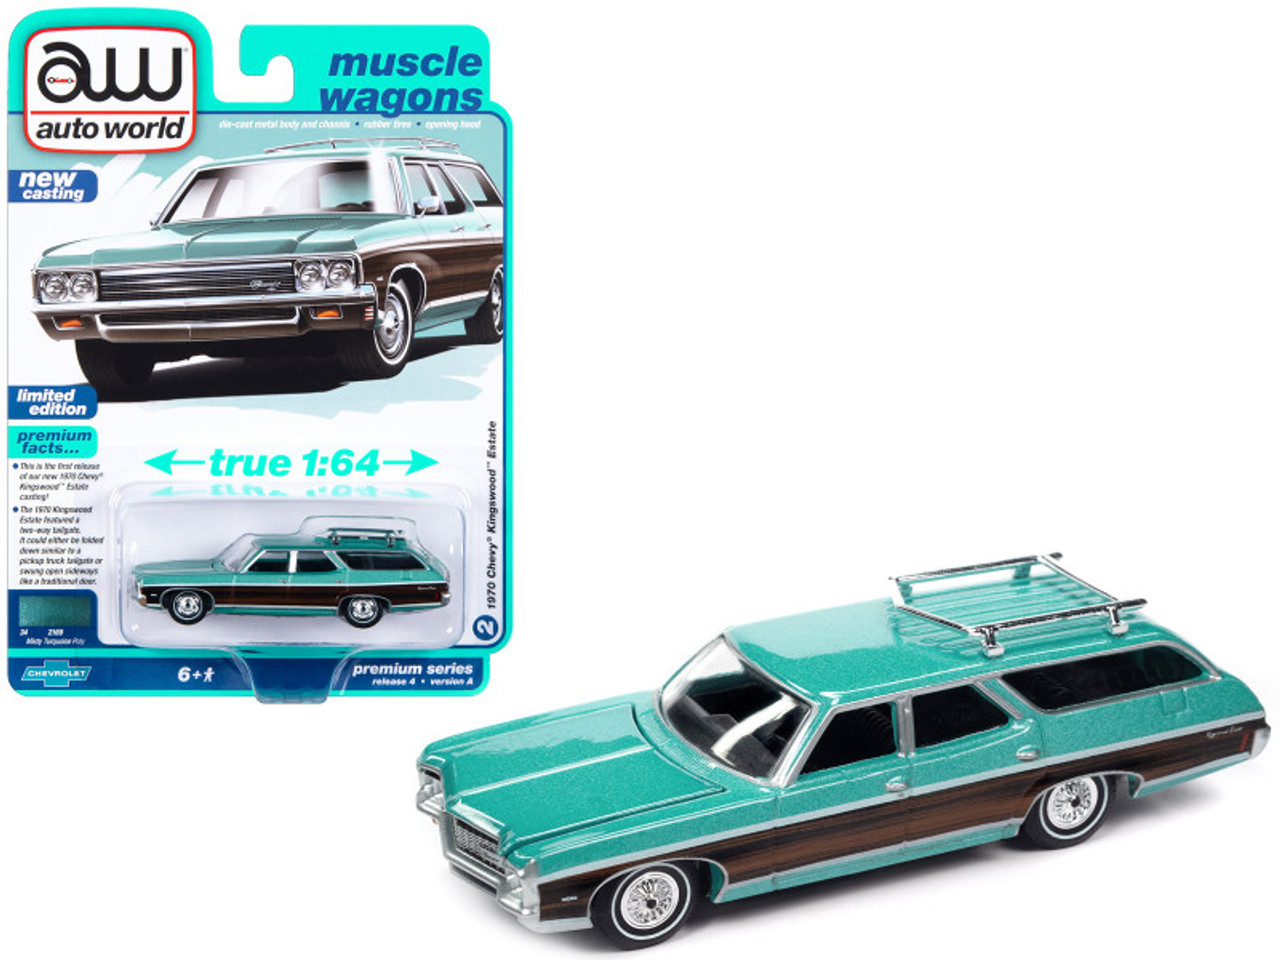 1970 Chevrolet Kingswood Estate Wagon Misty Turquoise Metallic with Side Woodgrain "Muscle Wagons" Limited Edition 1/64 Diecast Model Car by Auto World